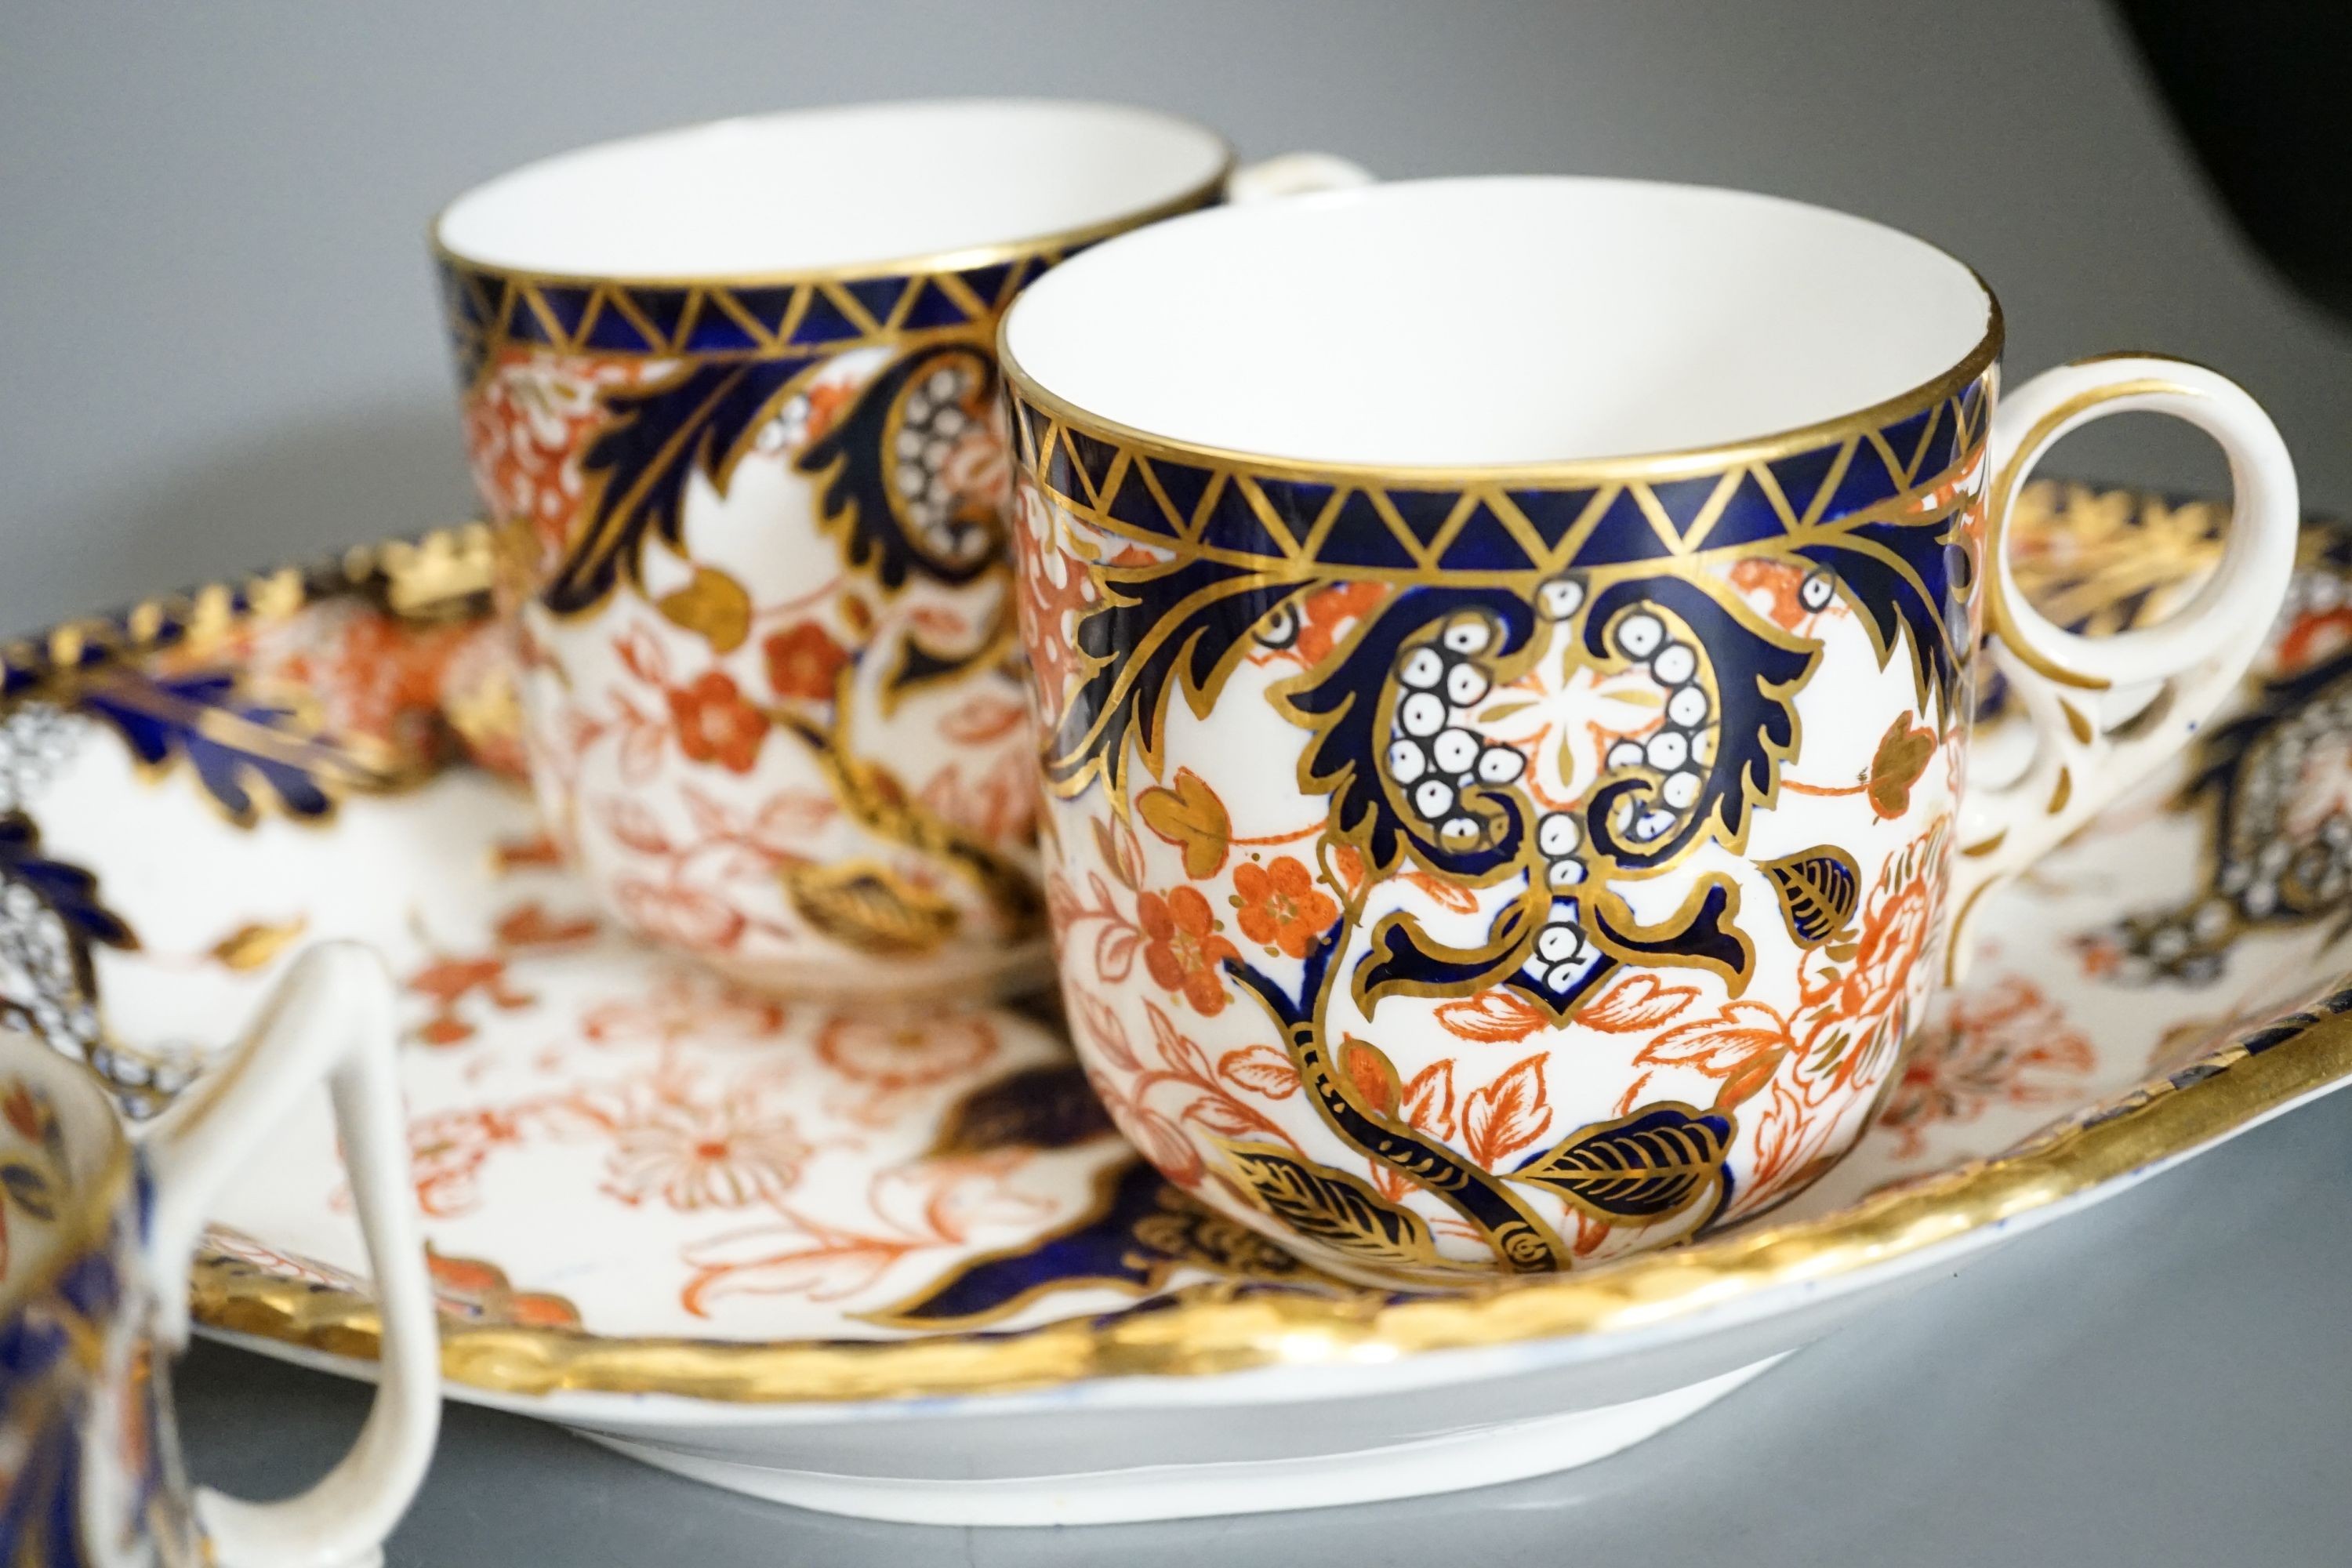 A collection of 19th century Derby Imari pattern tea, coffee and breakfast wares, predominantly pattern number 387